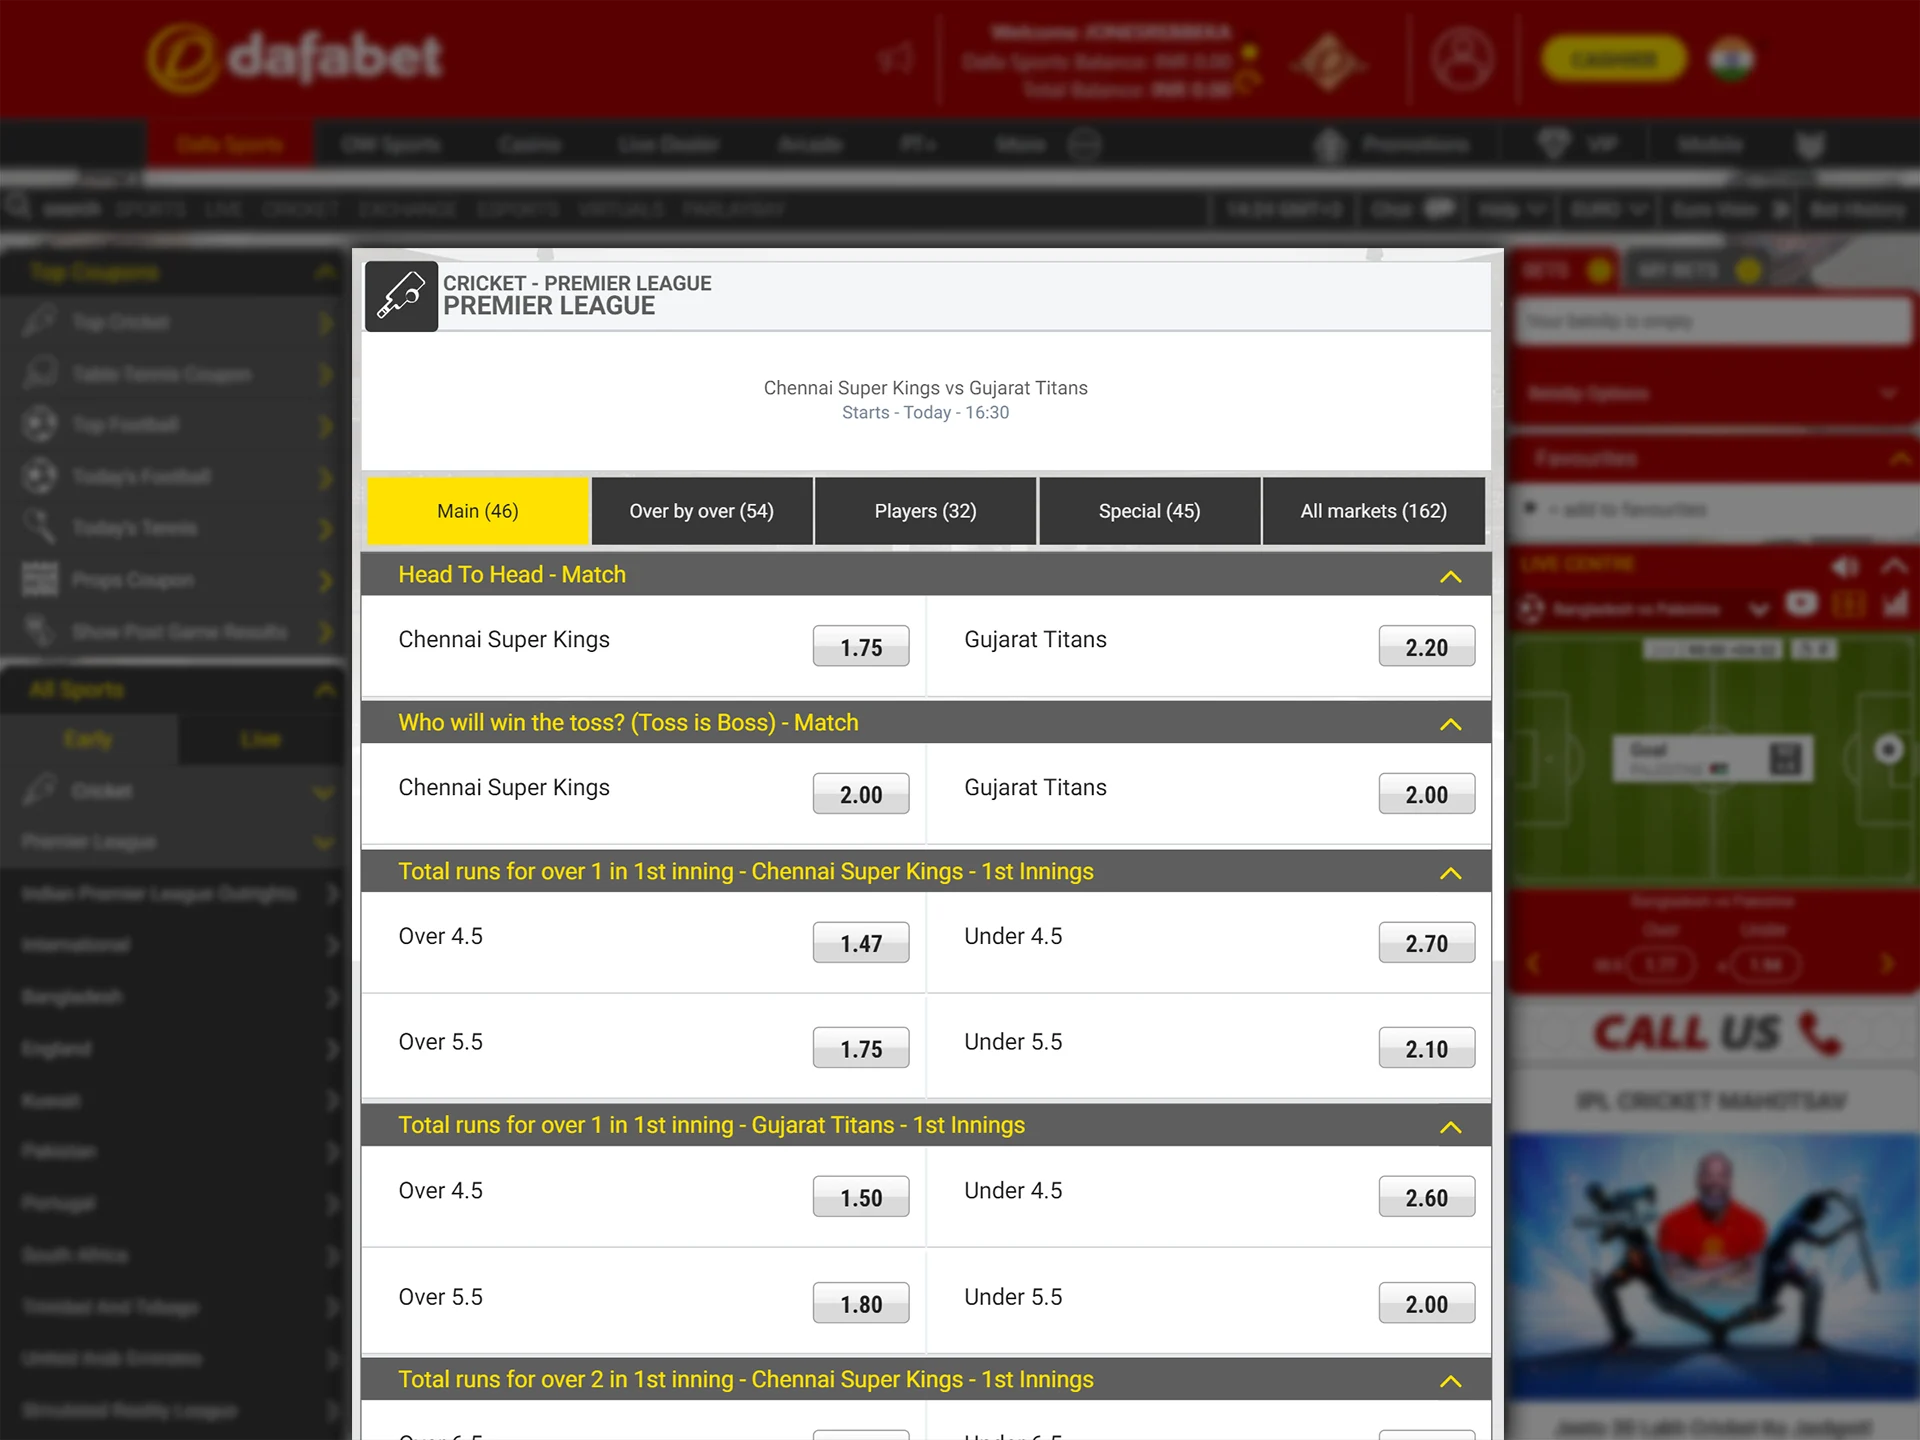 Explore the available betting markets at Dafabet and choose the one that suits you.